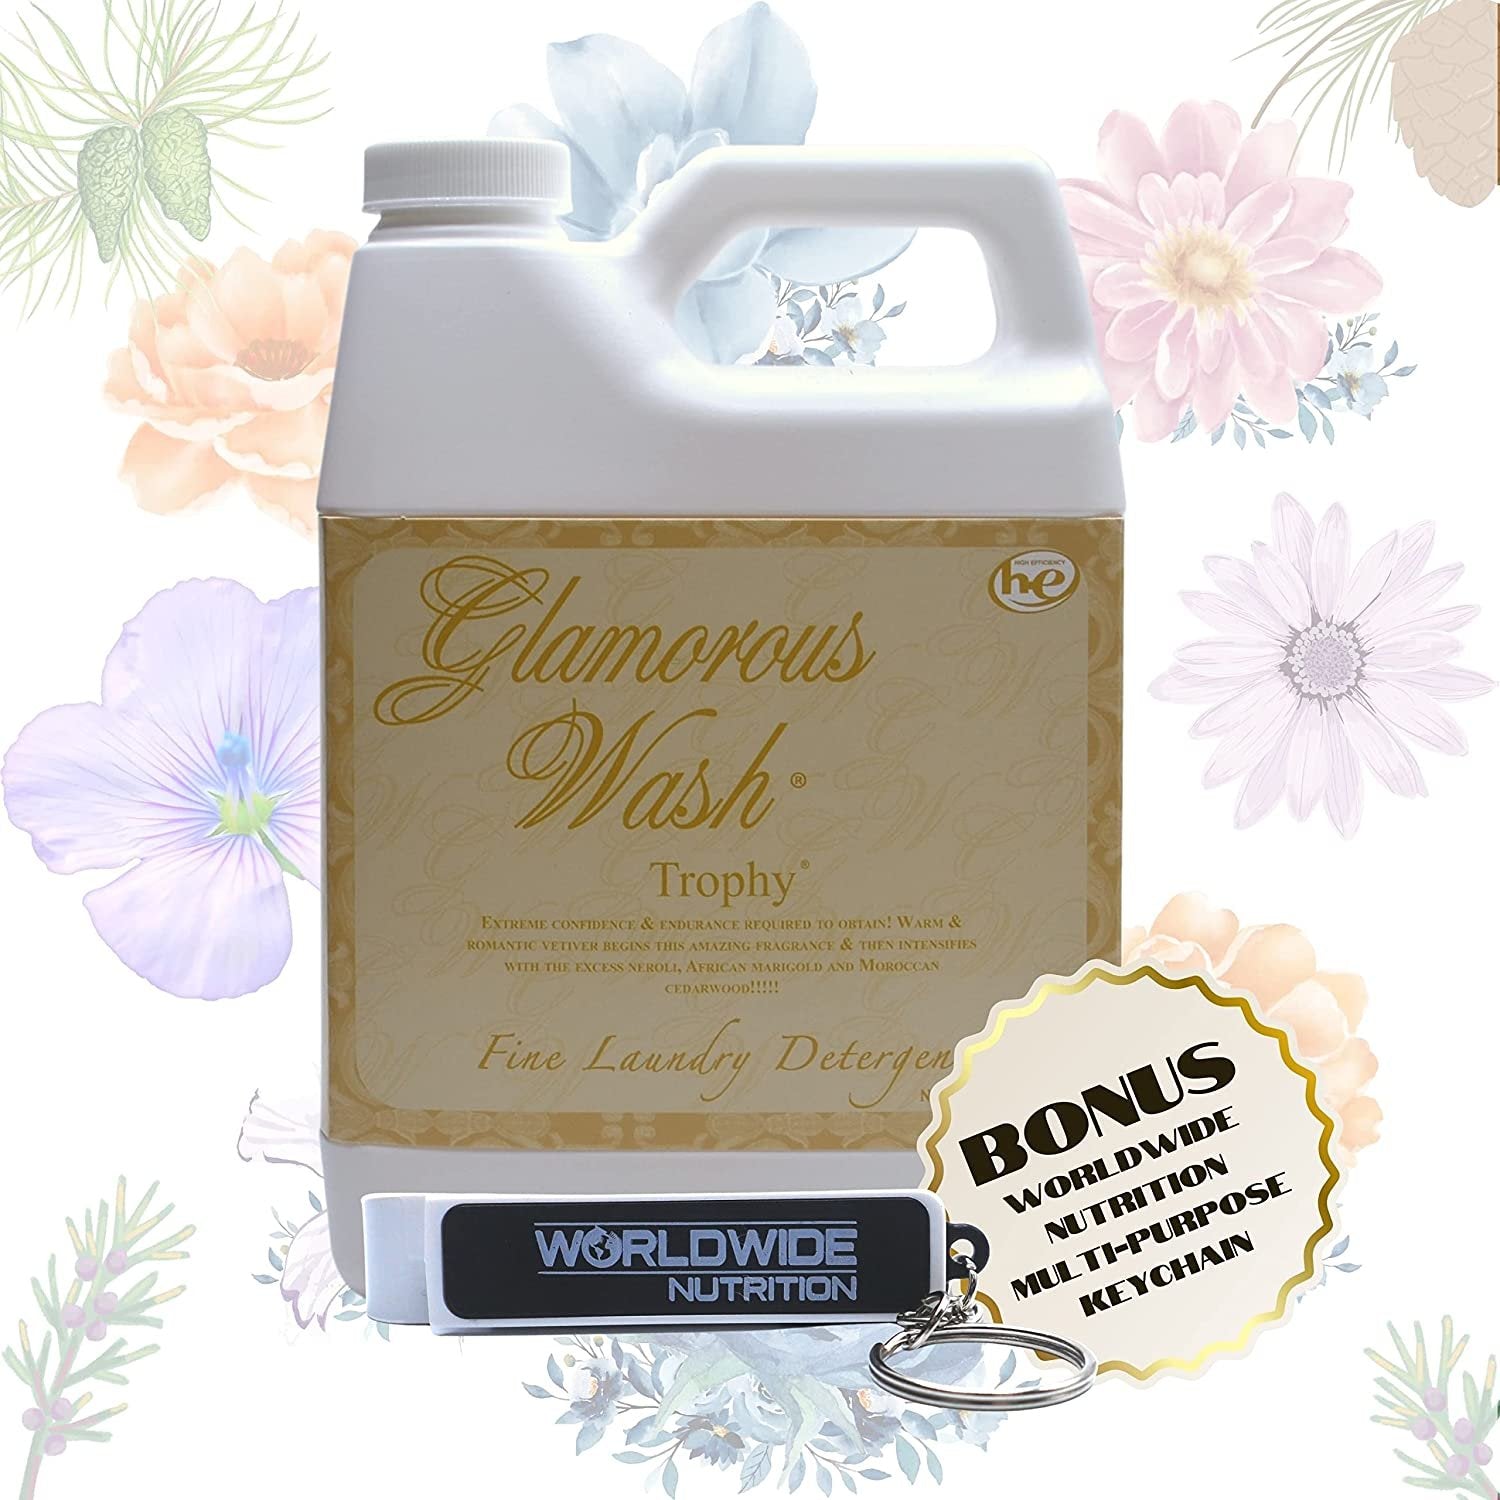 Tyler Candle Company Glamorous Wash Trophy Scent Fine Laundry Liquid Detergent - Liquid Laundry Detergent for Clothing - Hand and Machine Washable - 32 oz (907 g) Container w Bonus Key Chain